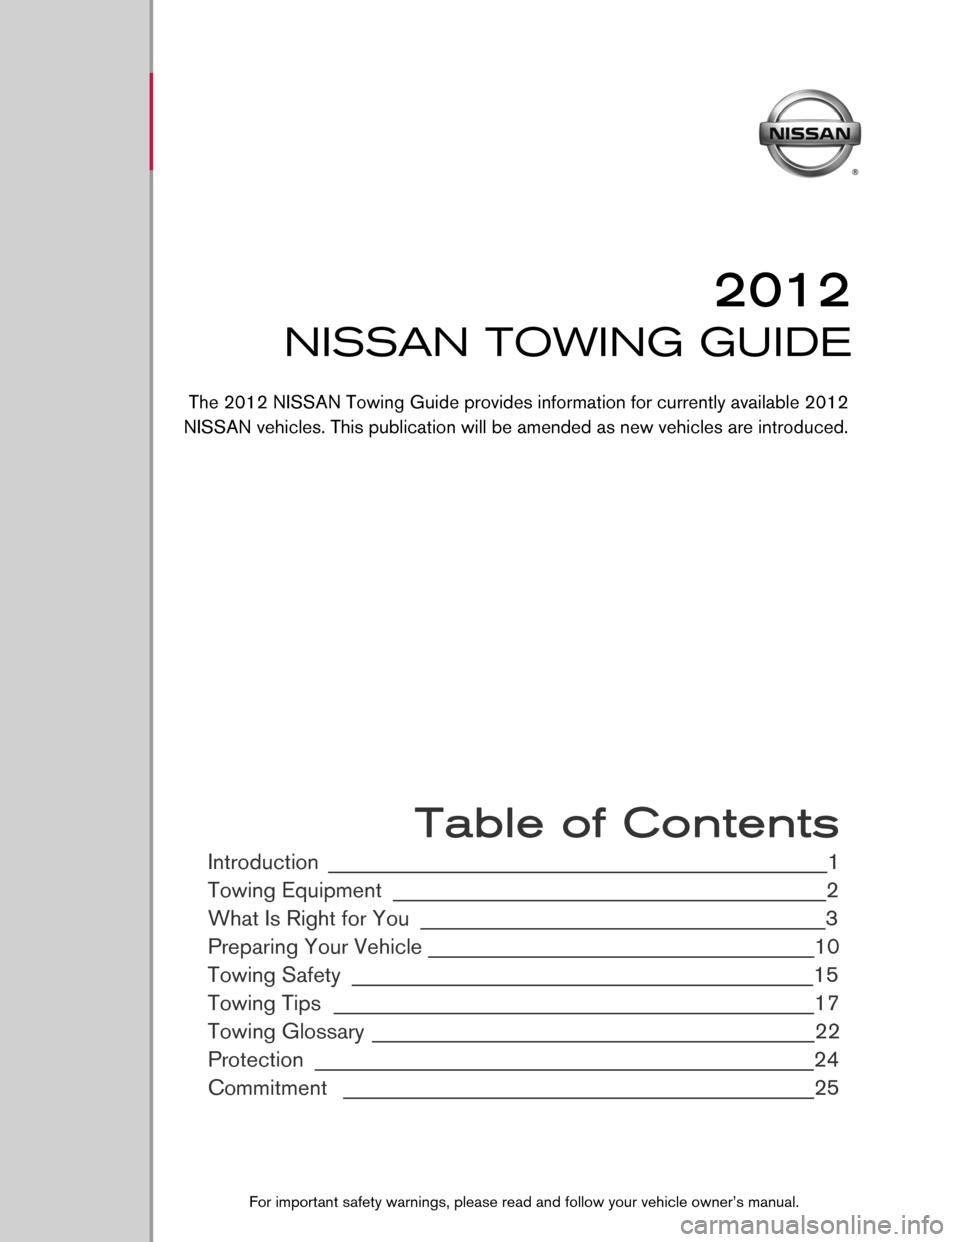 NISSAN VERSA HATCHBACK 2012 1.G Towing Guide 9
2012
NISSAN TOWING GUIDE
 Table of Contents
Introduction _____________________________________________________1 
Towing Equipment
 ______________________________________________2 
What Is Right for 